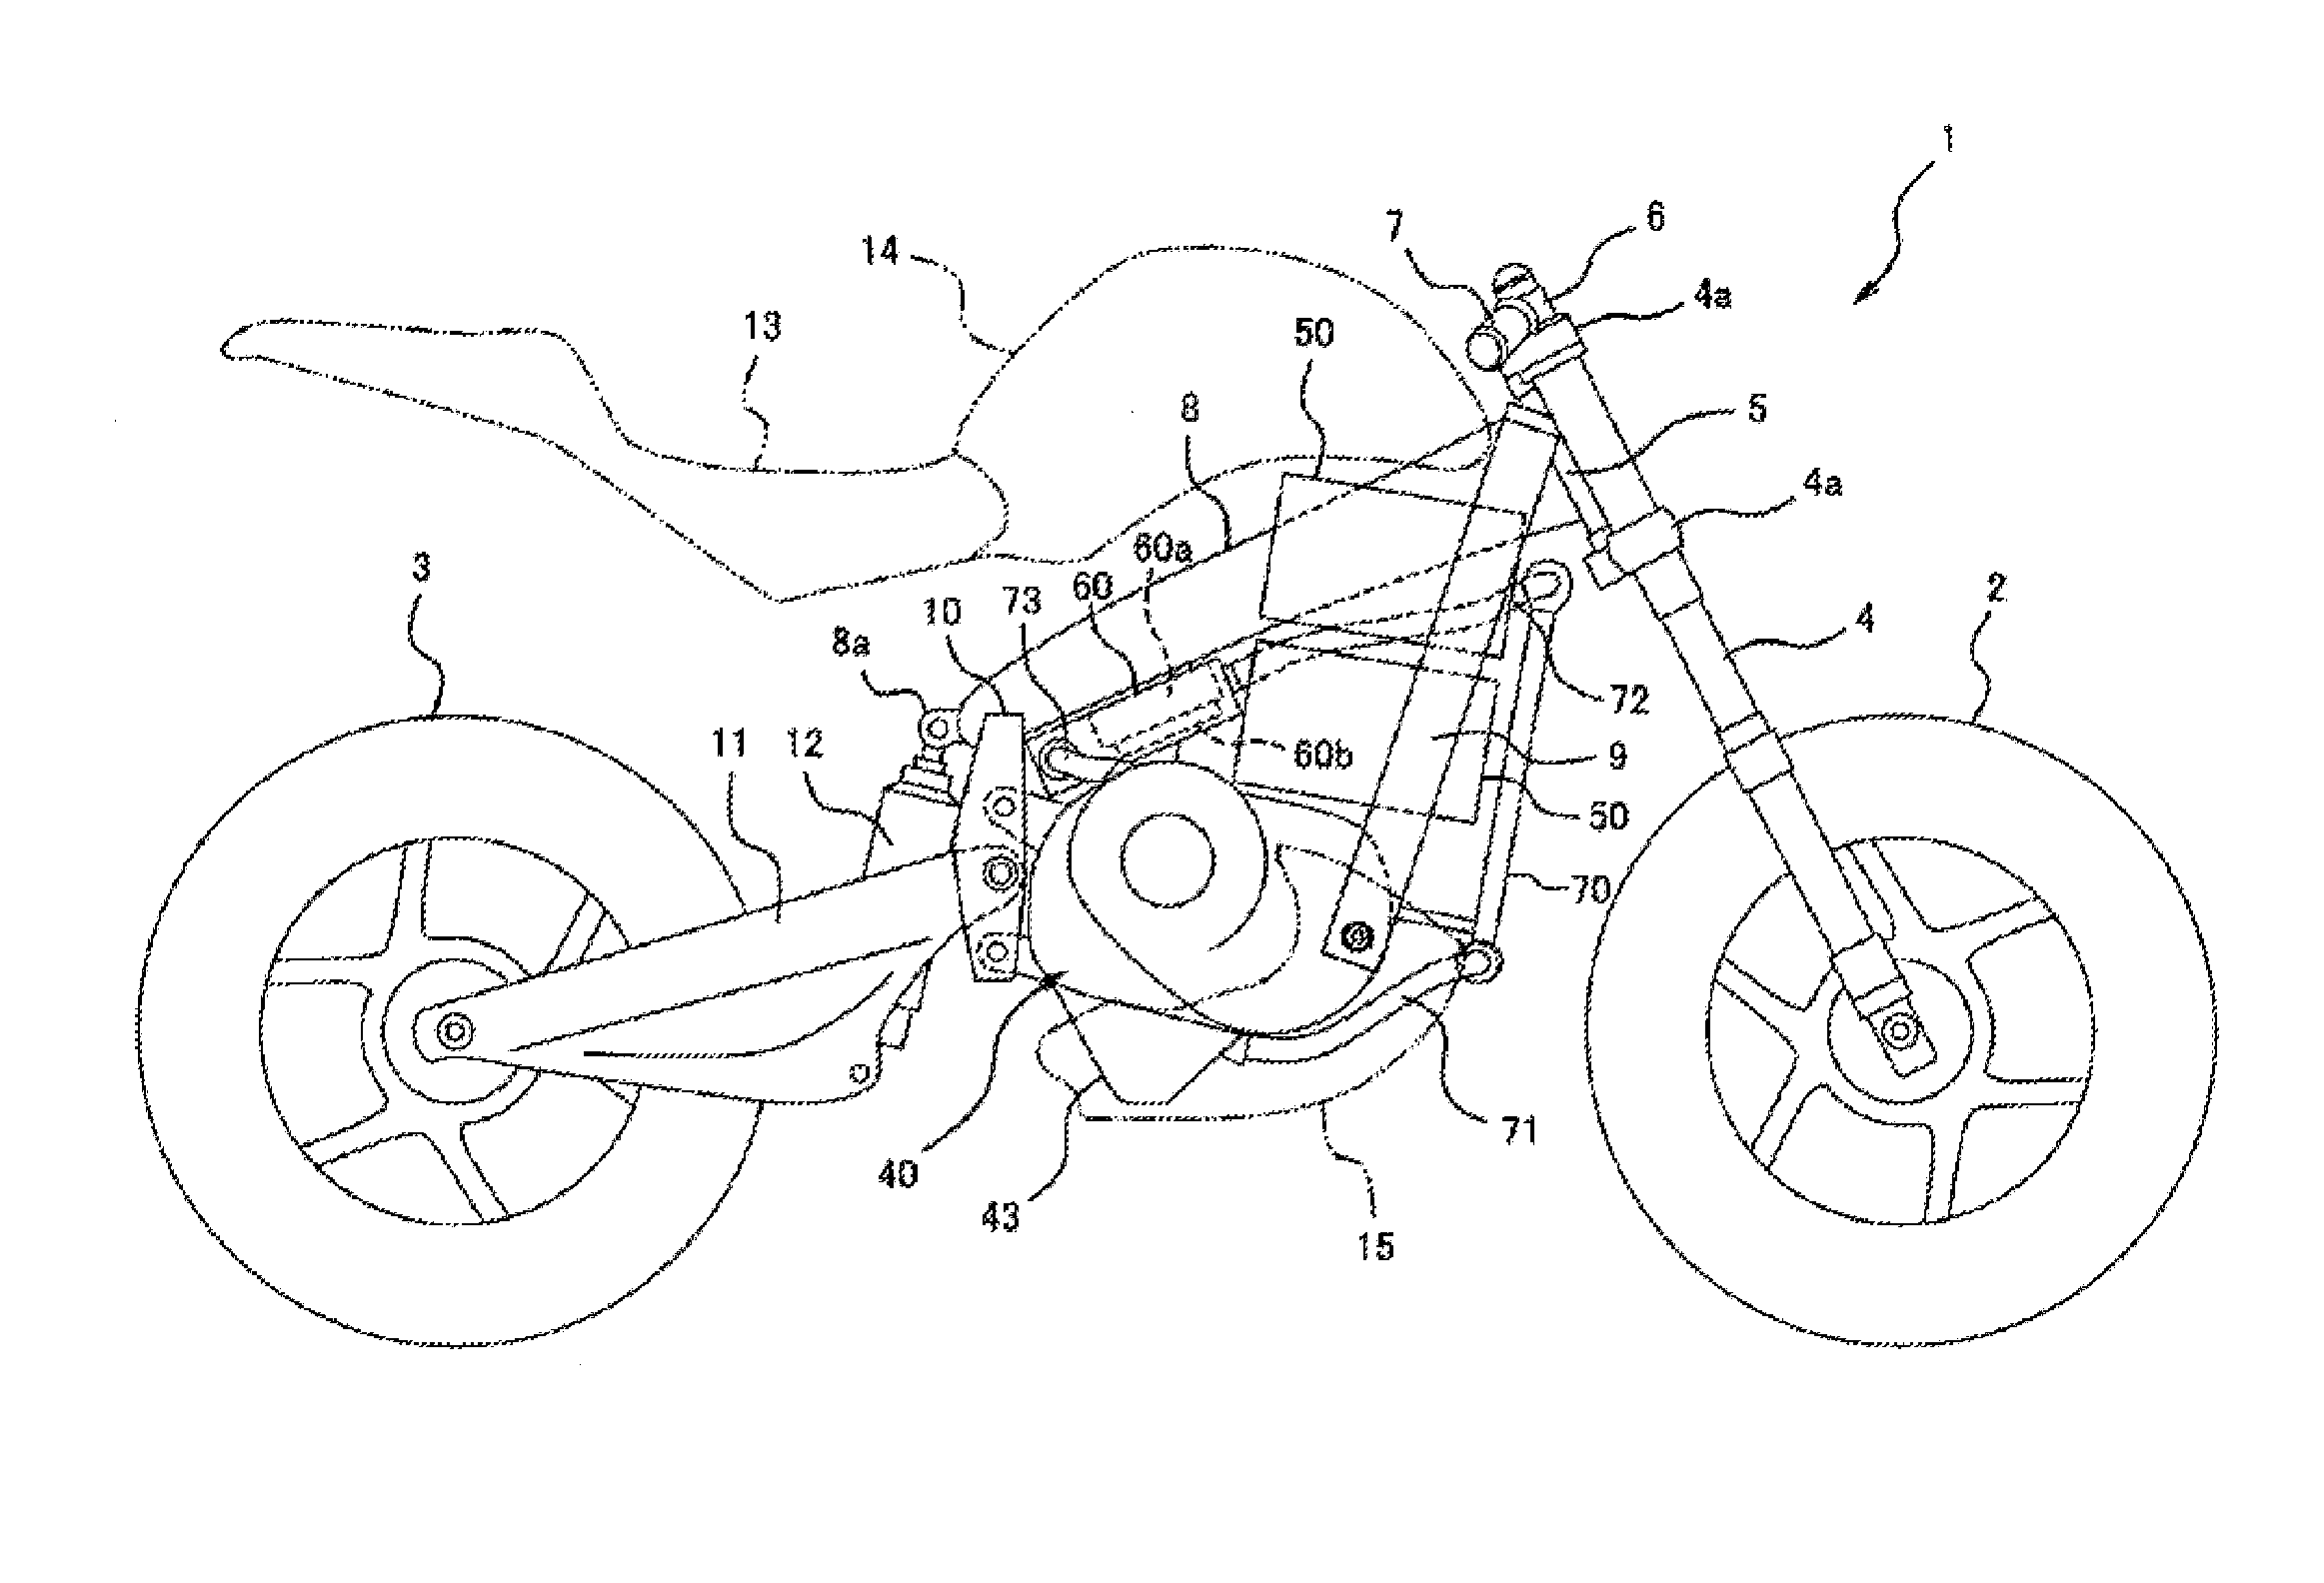 Cooling Structure for Electric Vehicle